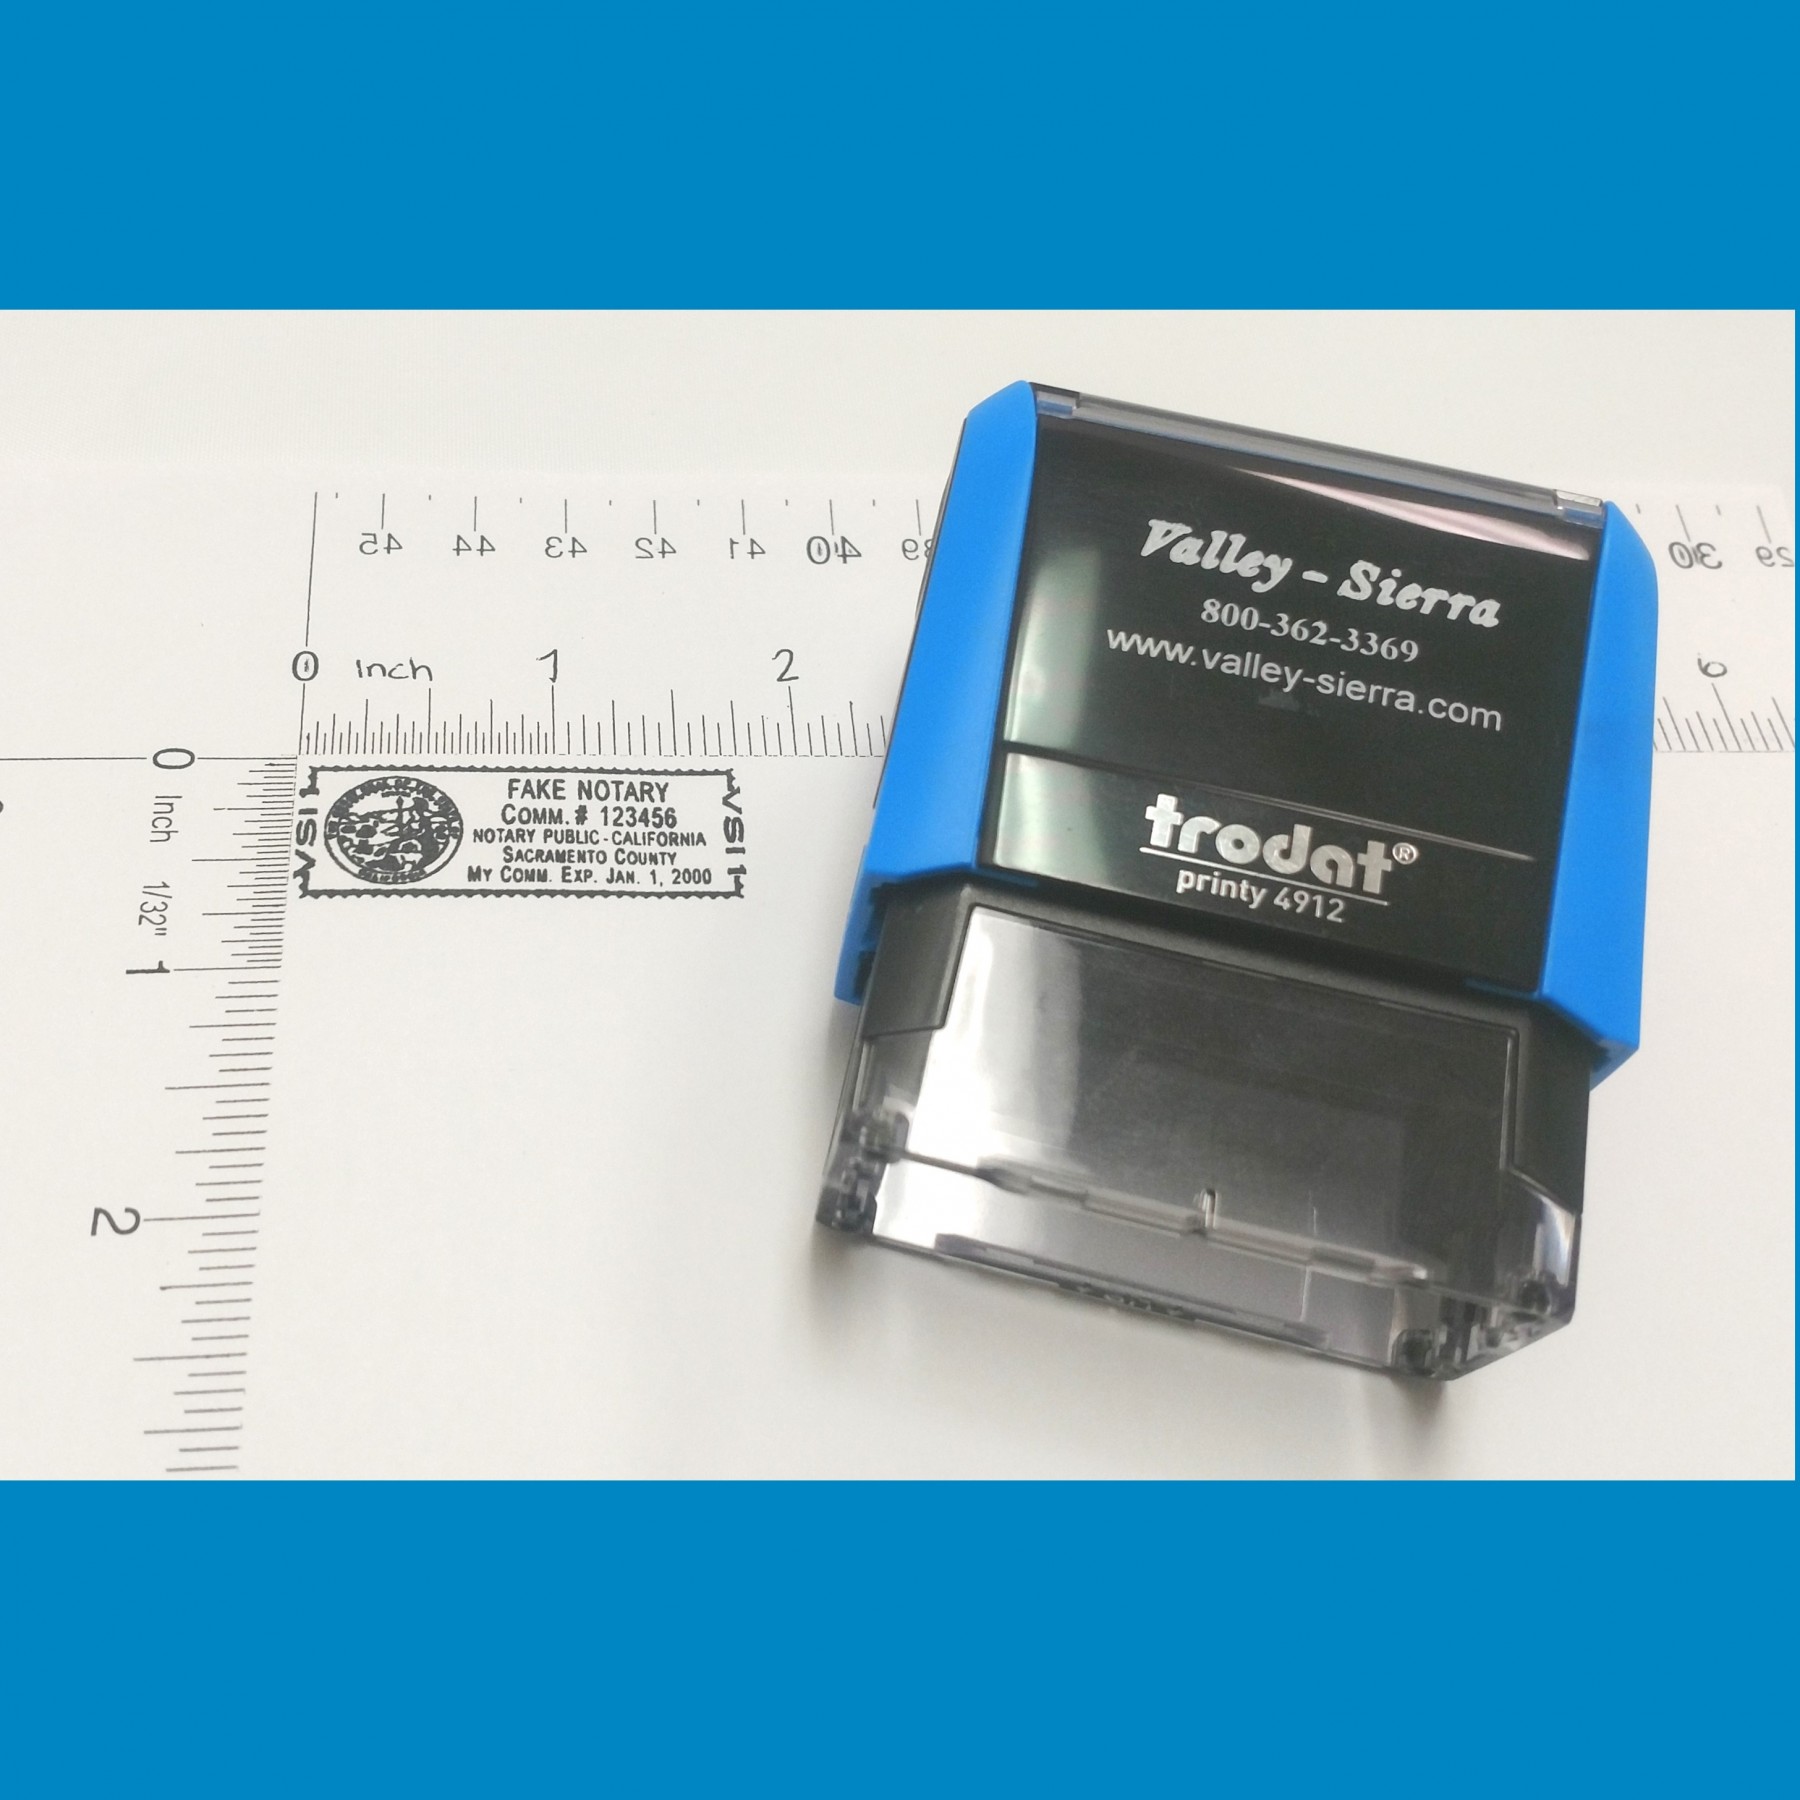 Deluxe Self-Ink Stamp